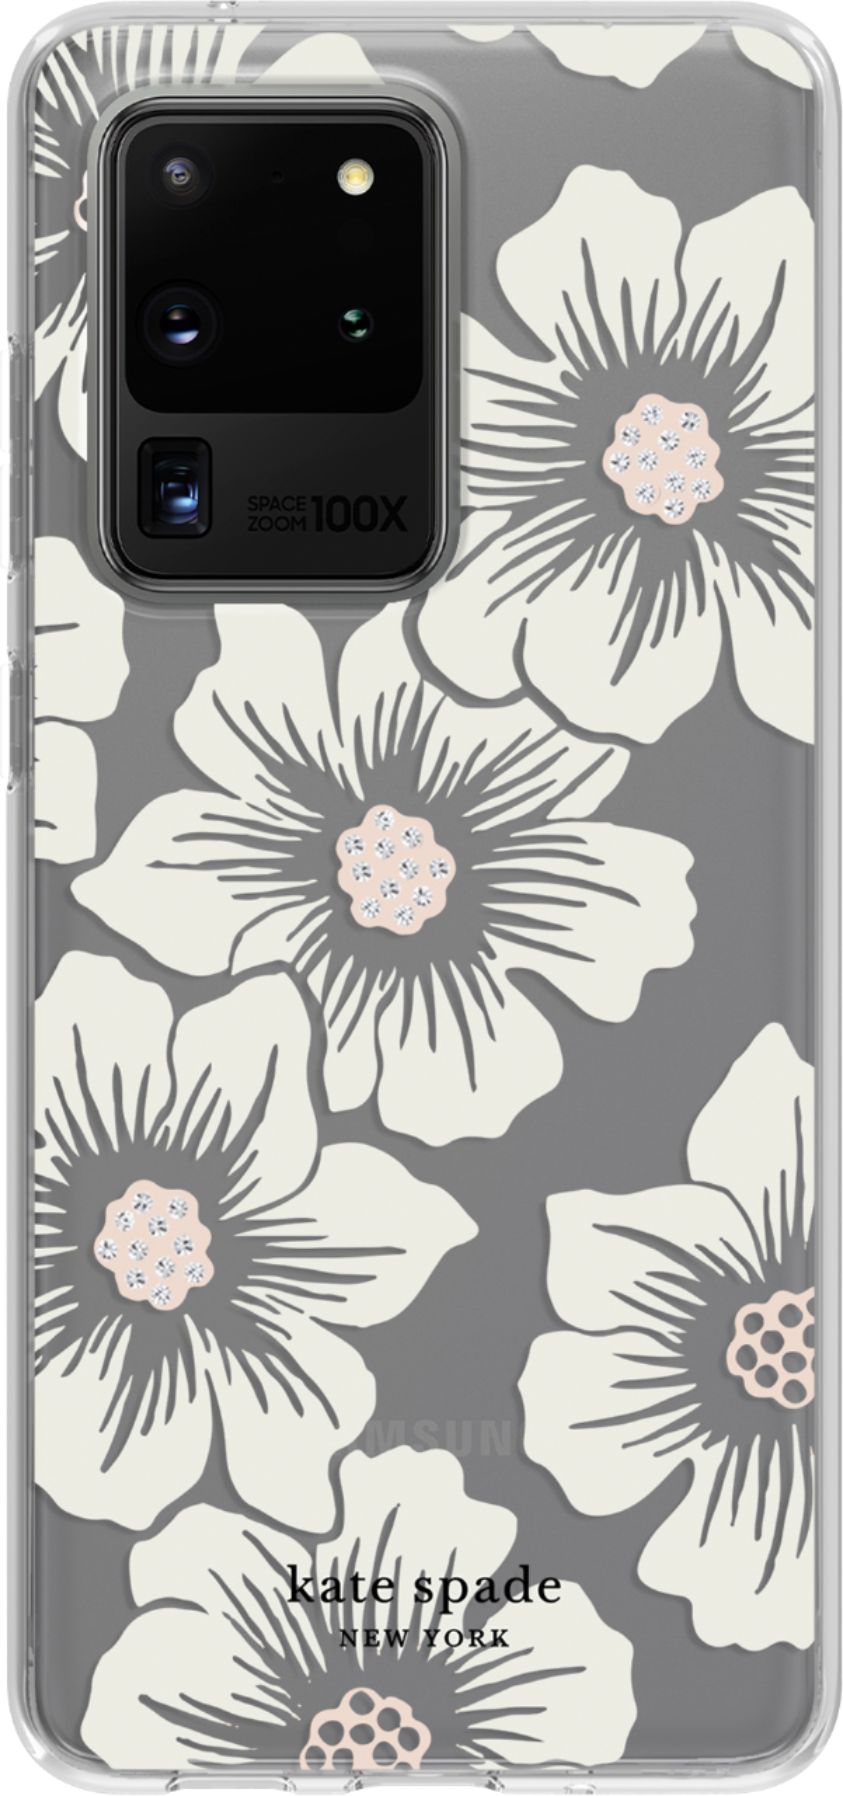 Fits Apple iPhone Galaxy S20 Google Pixel Samsung Galaxy Note 20 Royal Flowers iPhone 12 Clear Case Huawei P30